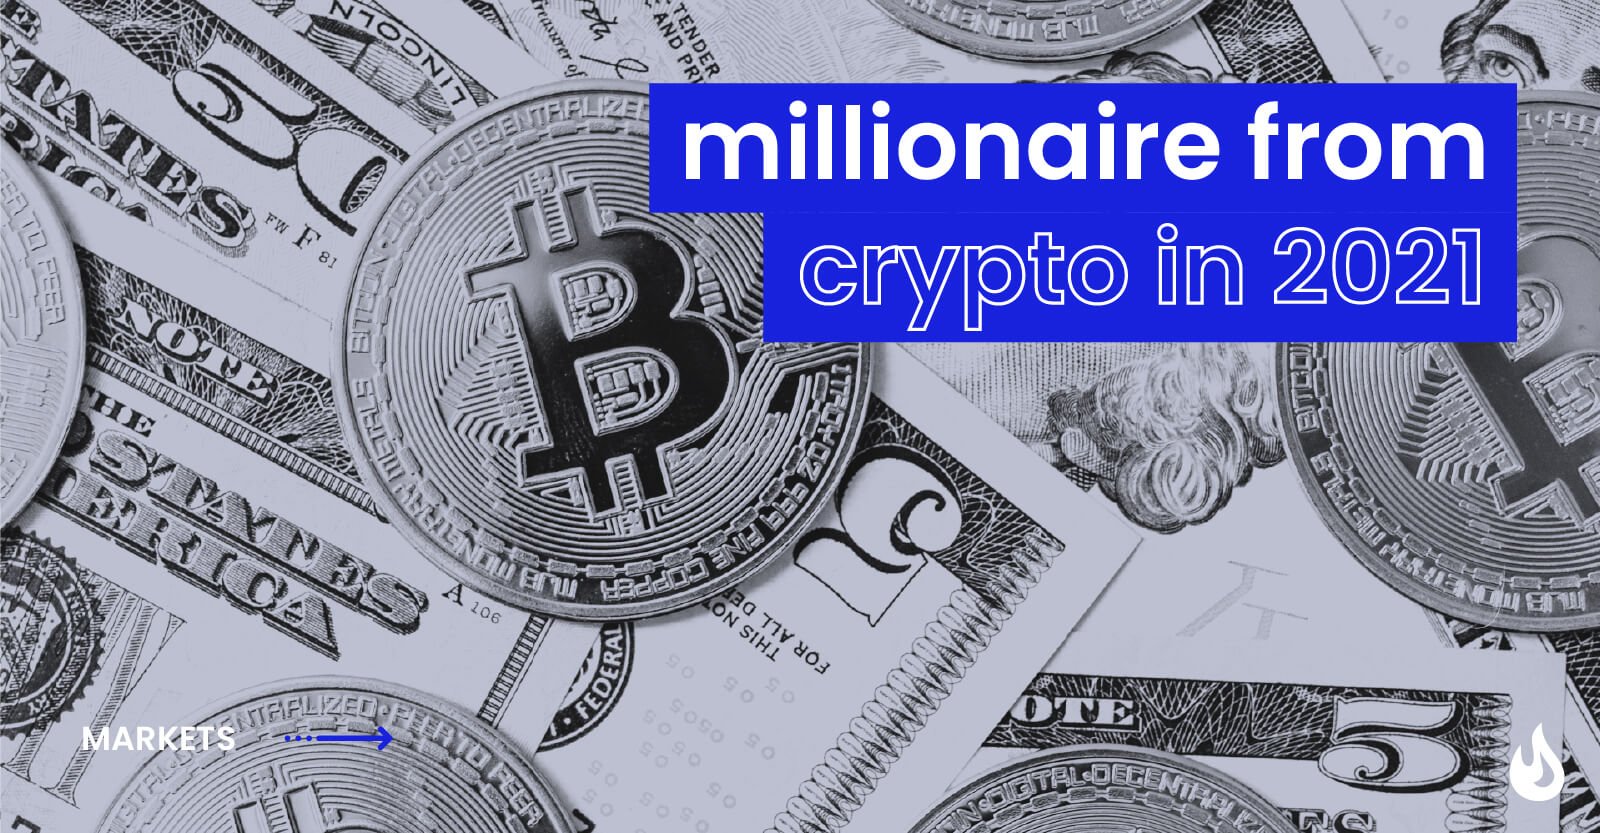 how much crypto should i buy to become a millionaire